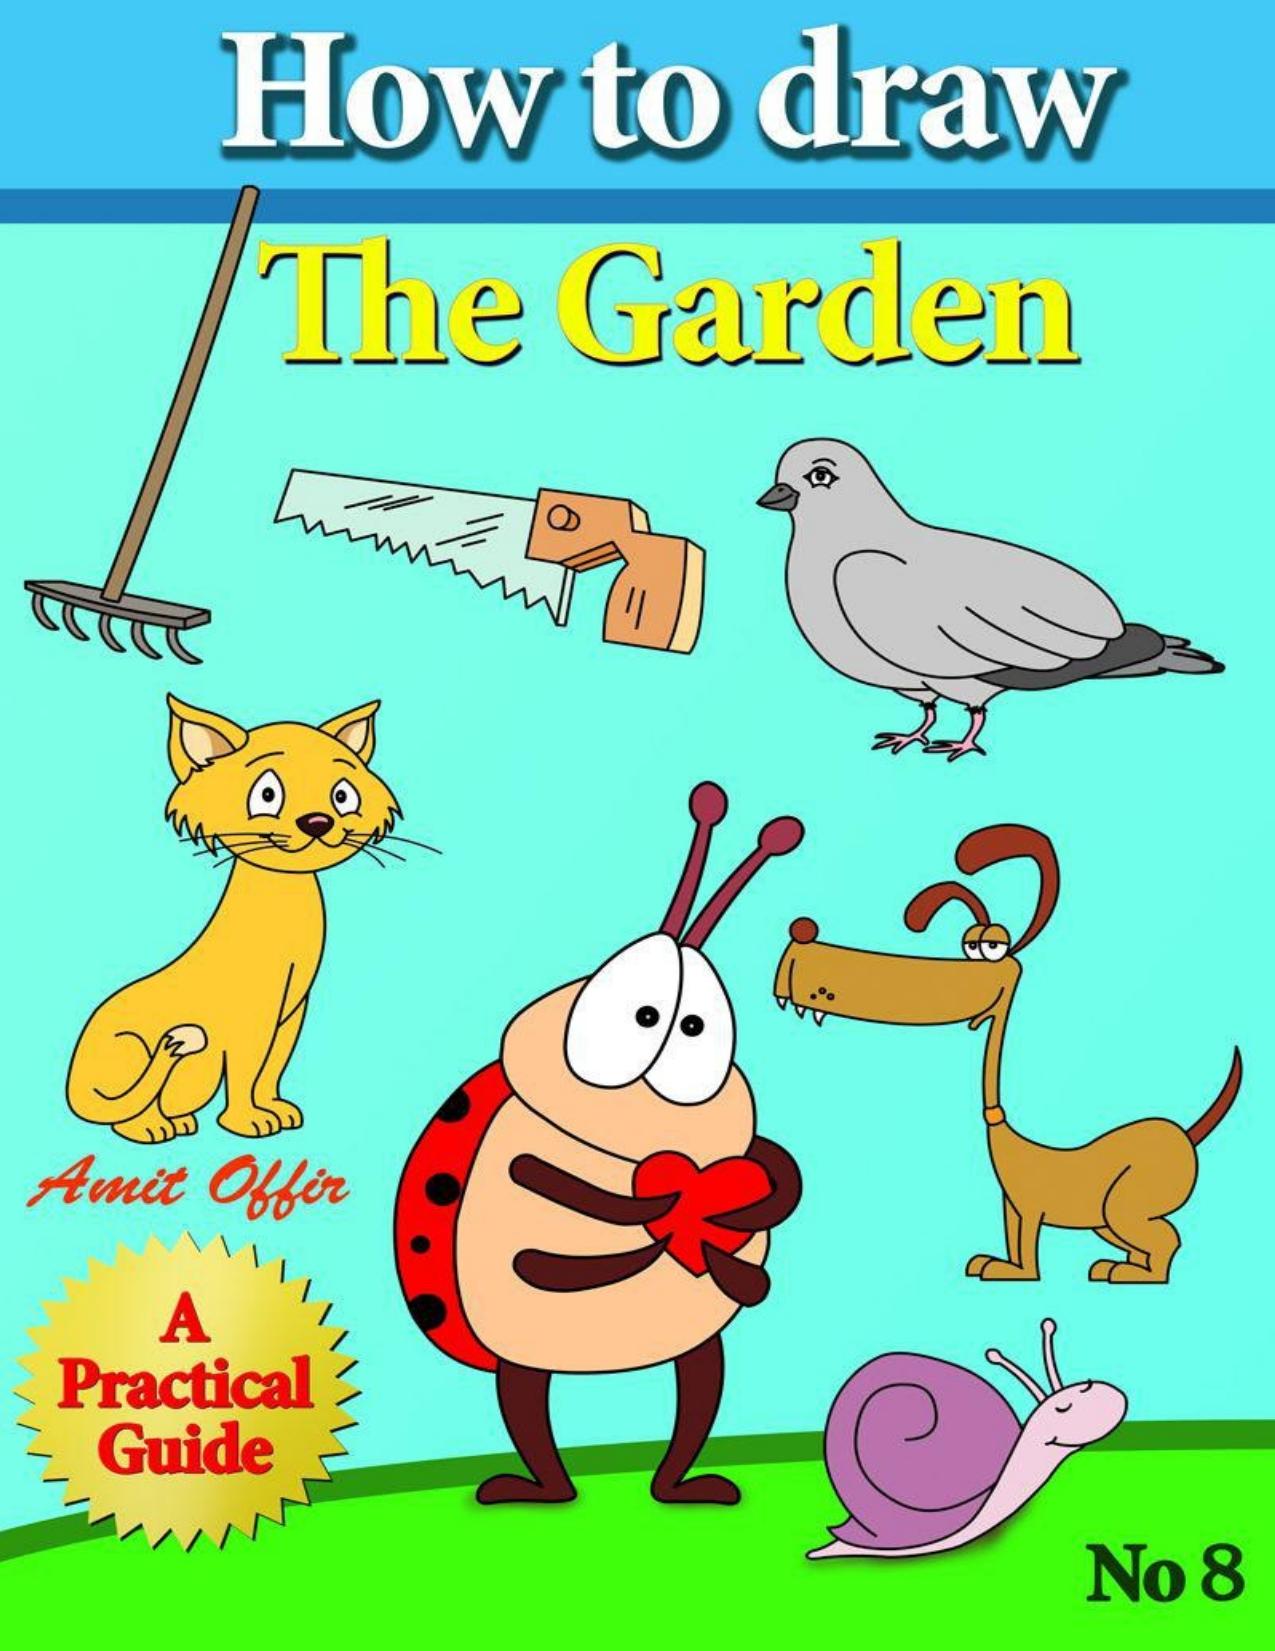 How to Draw the Garden: Drawing Book for Kids and Adults that Will Teach You How to Draw BIrds Step by Step - PDFDrive.com